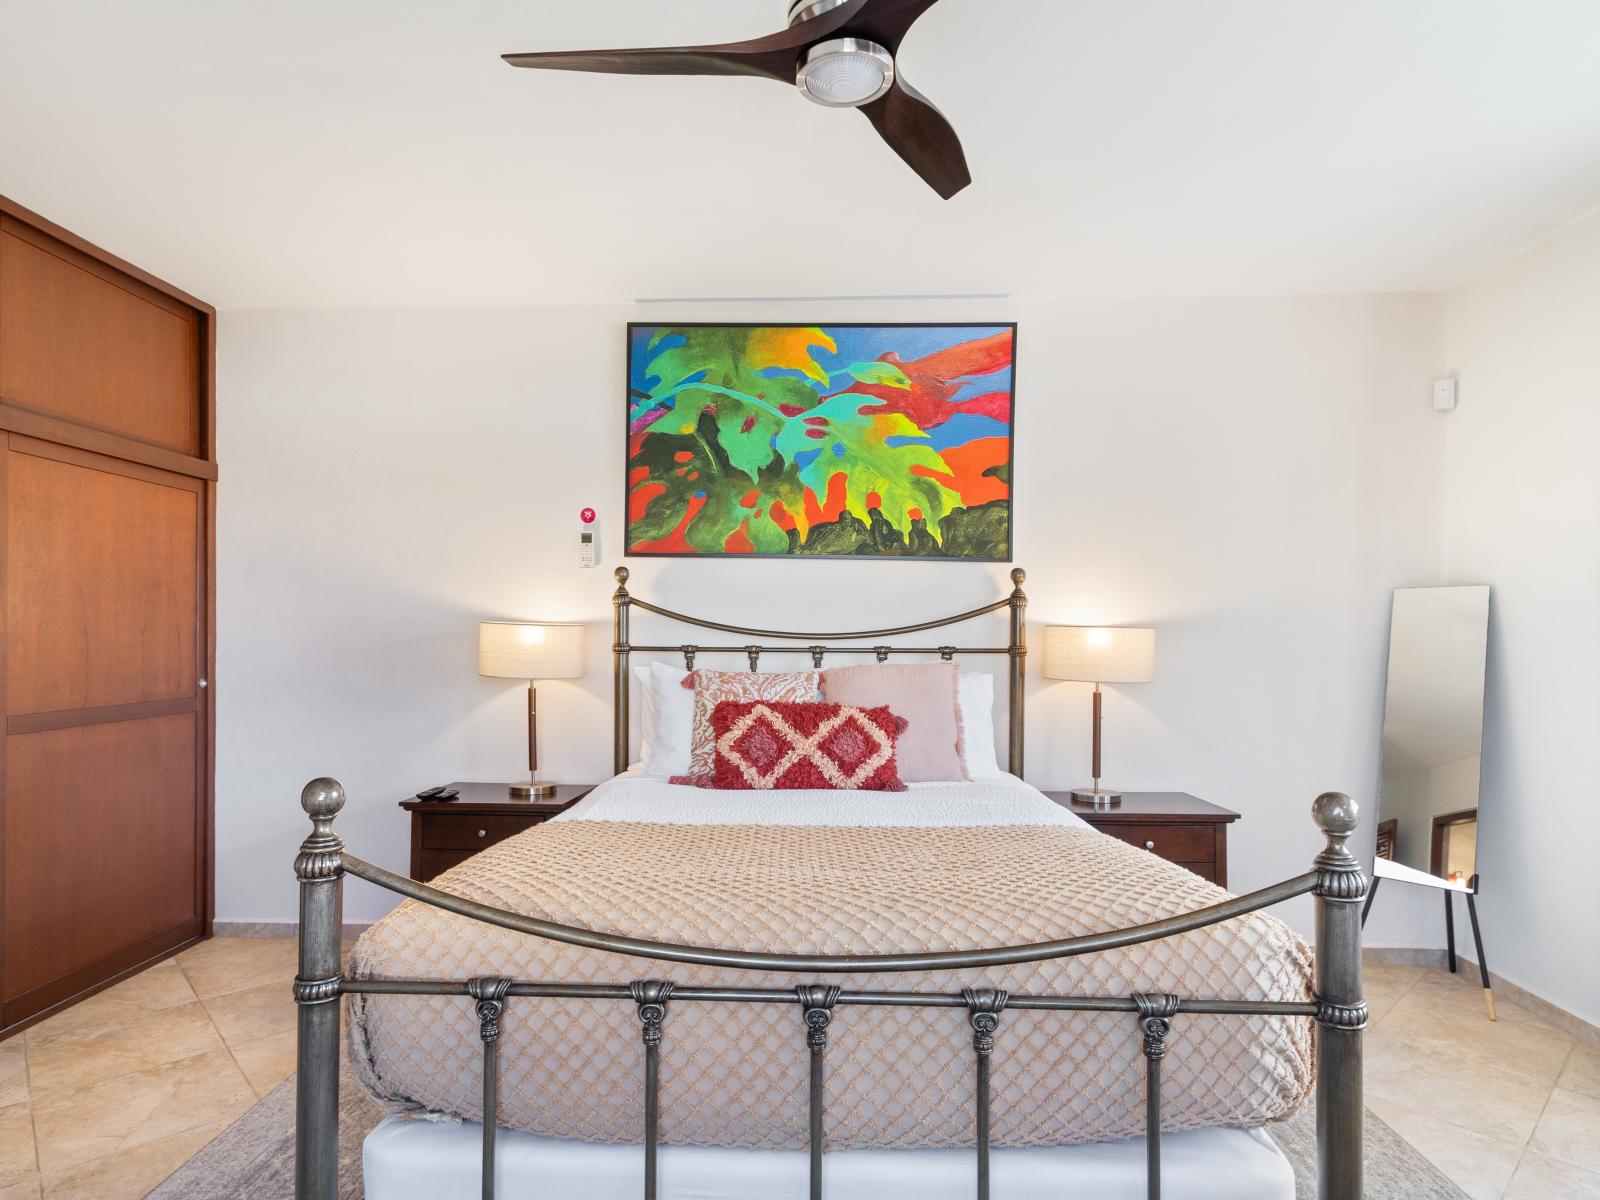 Enjoy comfort and privacy in the fourth bedroom, featuring a queen bed and its own ensuite bathroom.